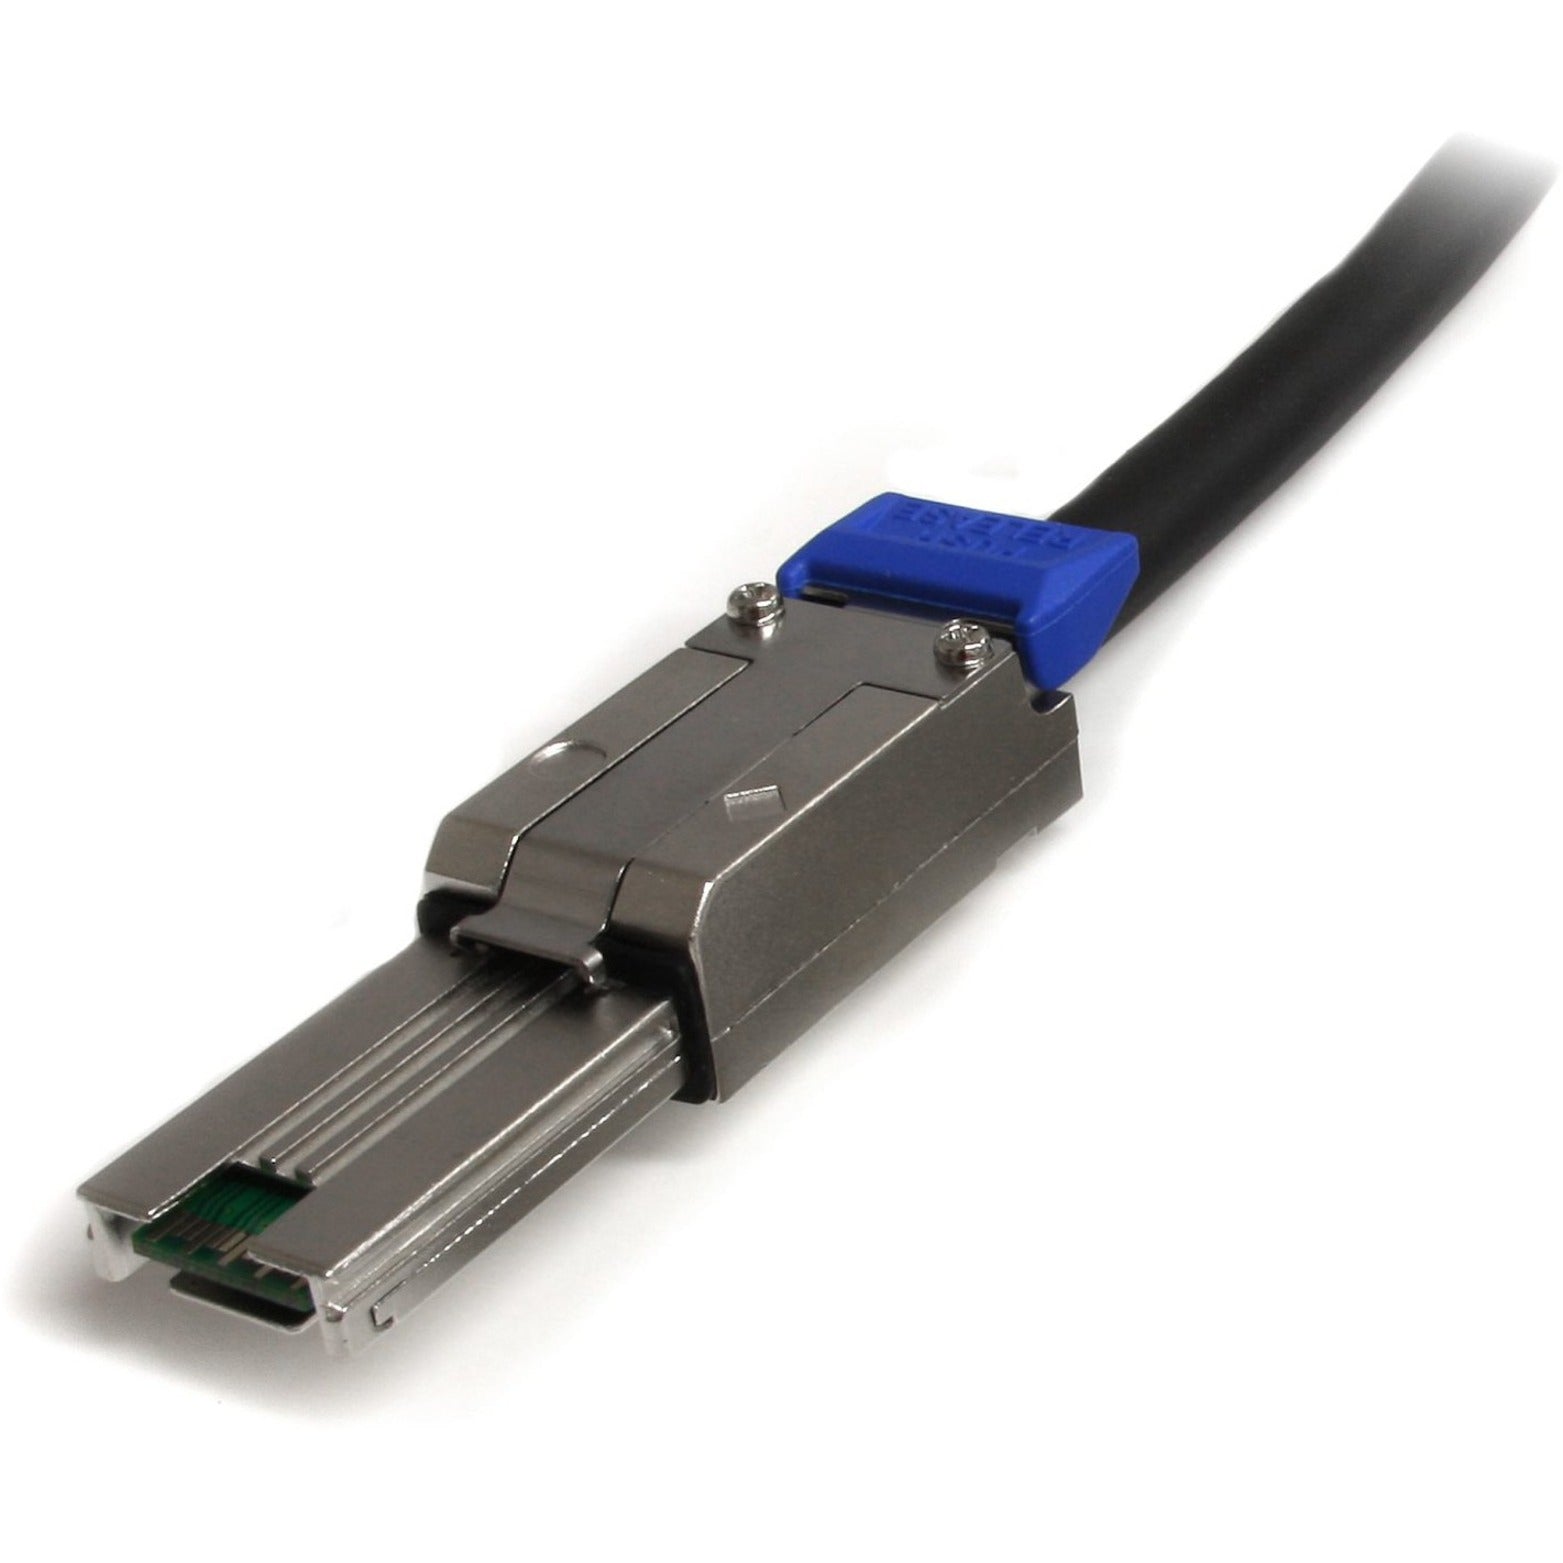 StarTech.com ISAS88883 3m External Mini SAS Cable - Serial Attached SCSI SFF-8088 to SFF-8088, Latching Connector, 6 Gbit/s Data Transfer Rate